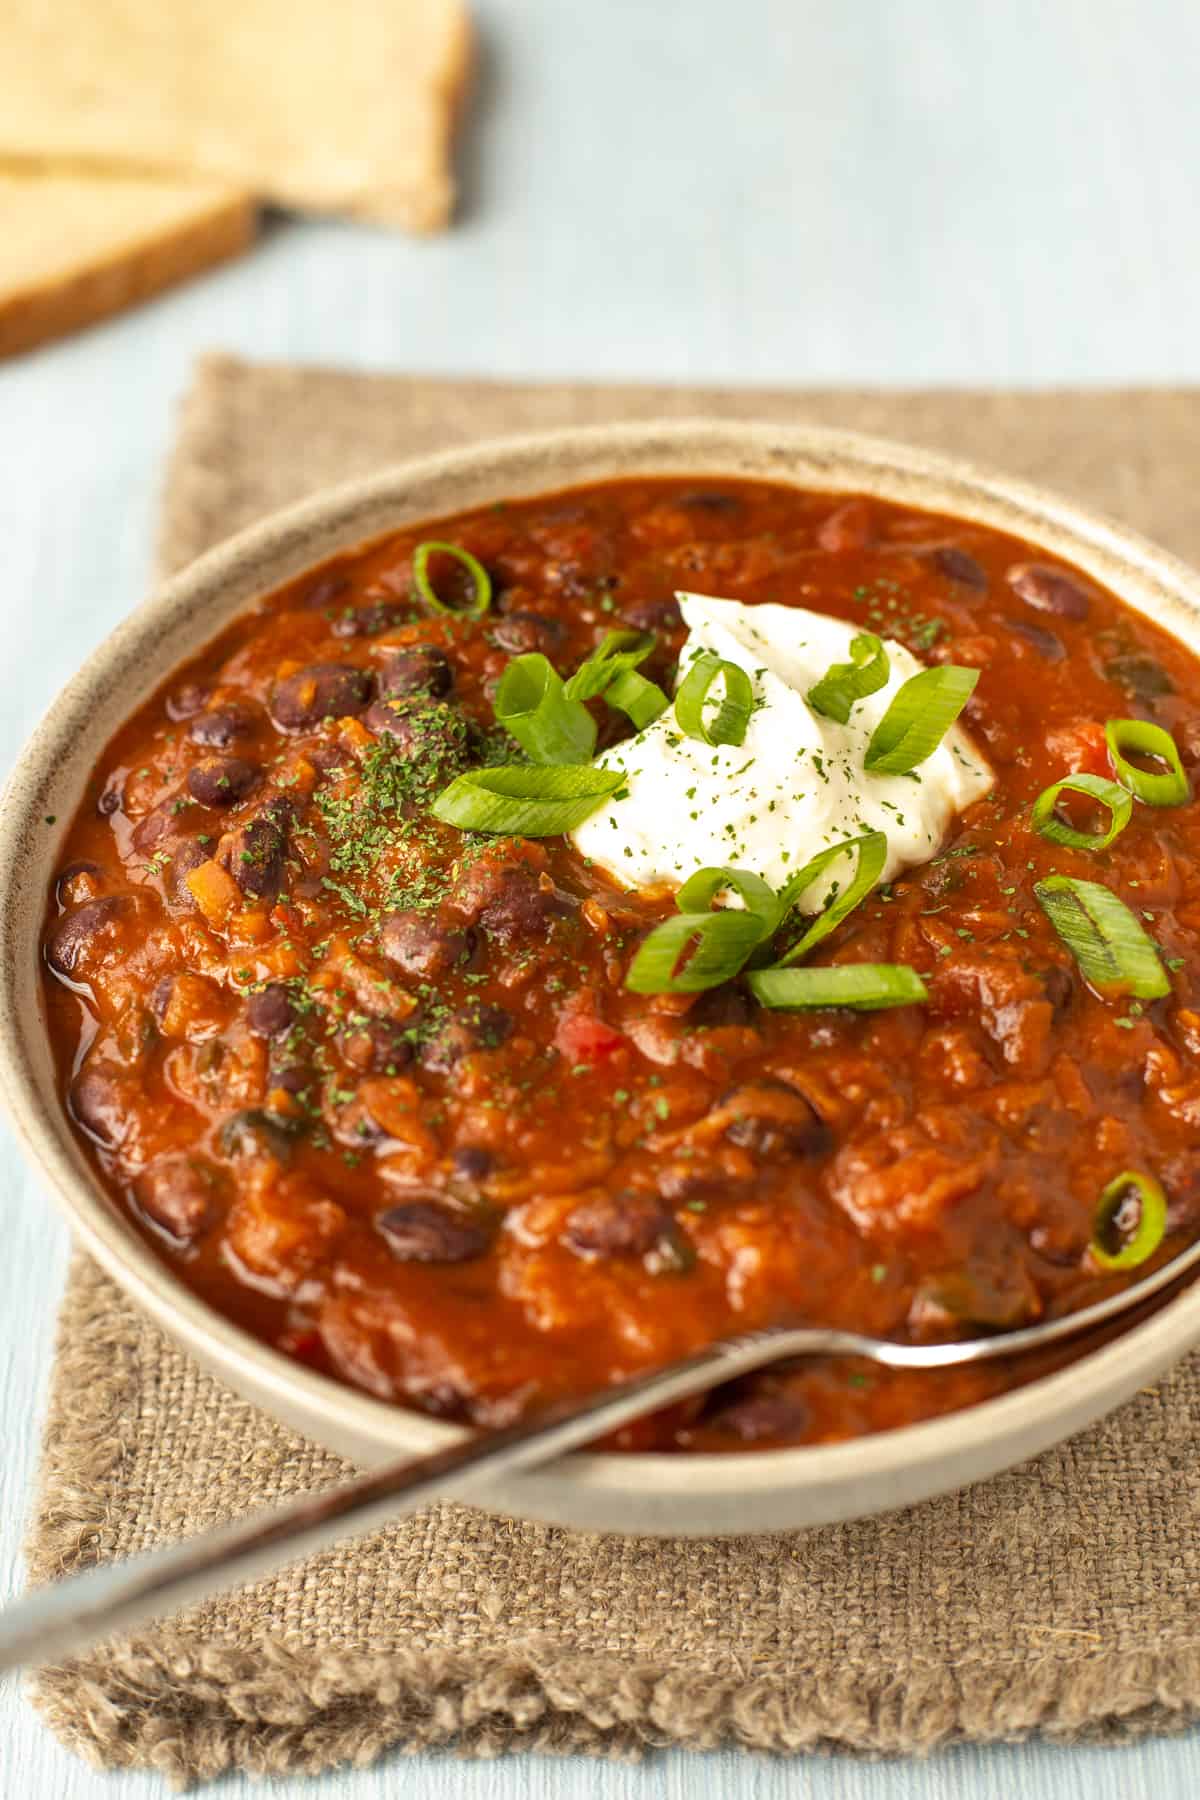 A bowlful of black bean soup topped with spring onions and sour cream.